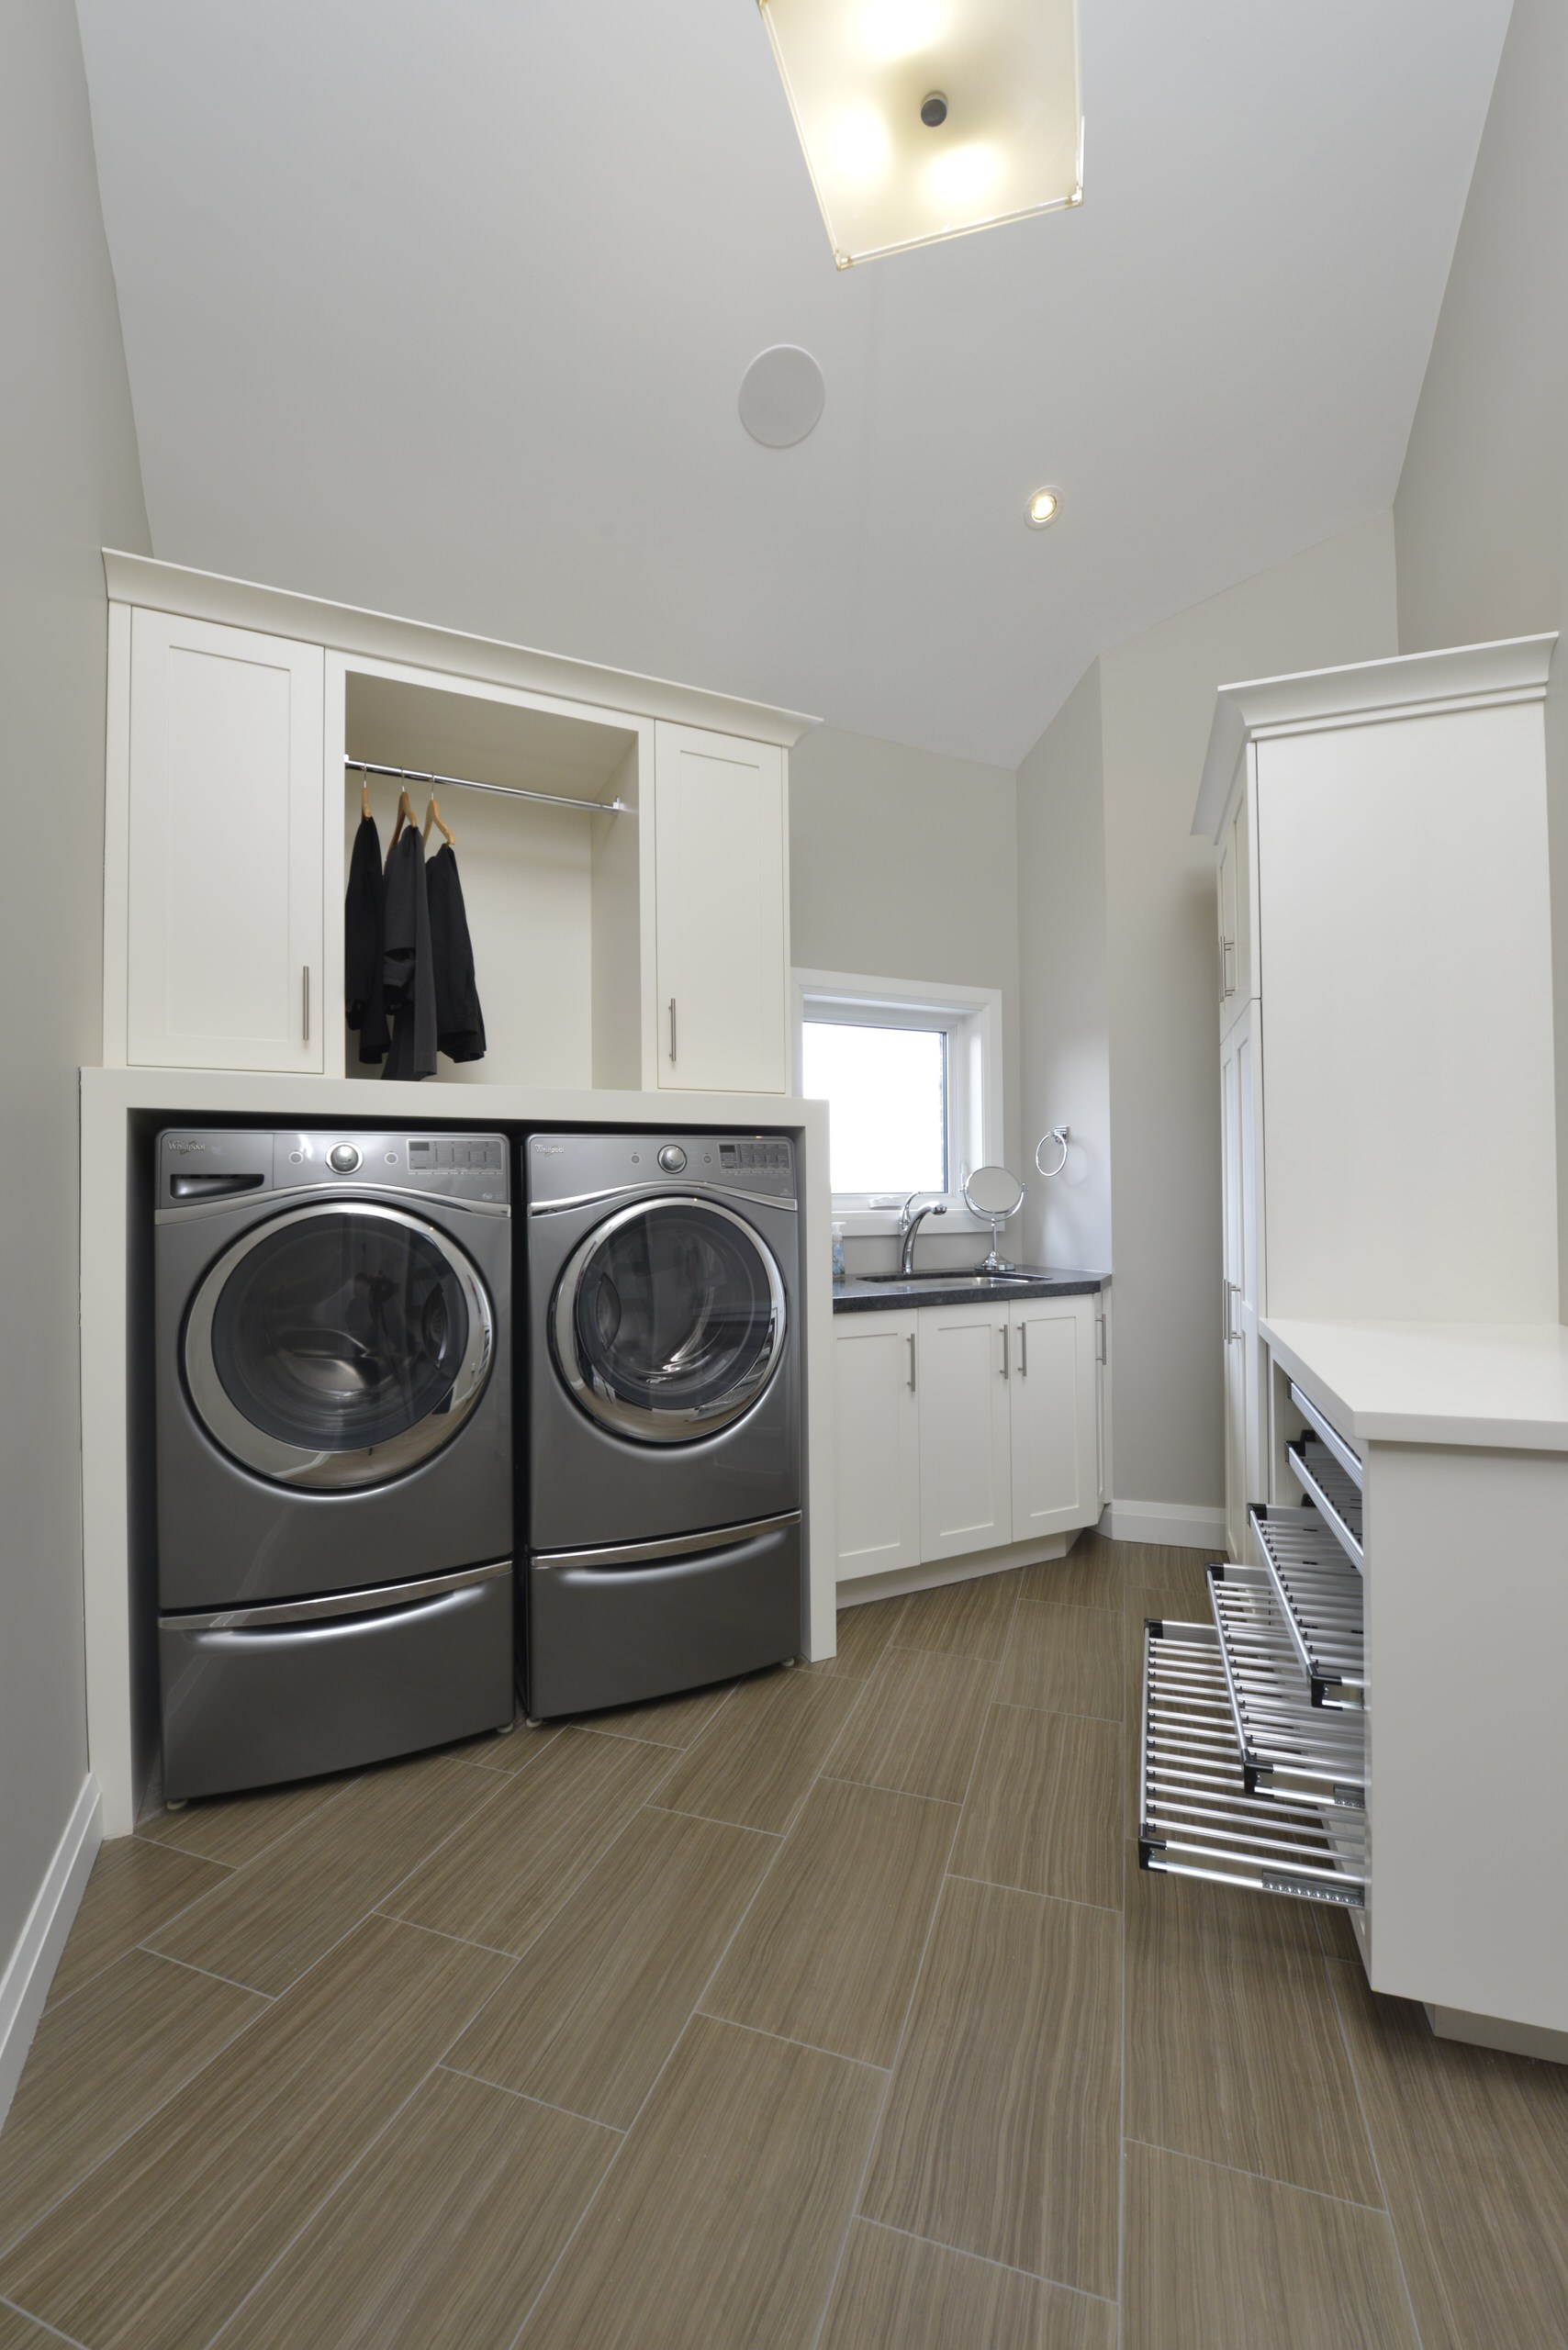 https://st.hzcdn.com/simgs/pictures/laundry-rooms/contemporary-laundry-room-lindsay-construction-services-img~be116525036a41e5_14-3112-1-da7ecba.jpg